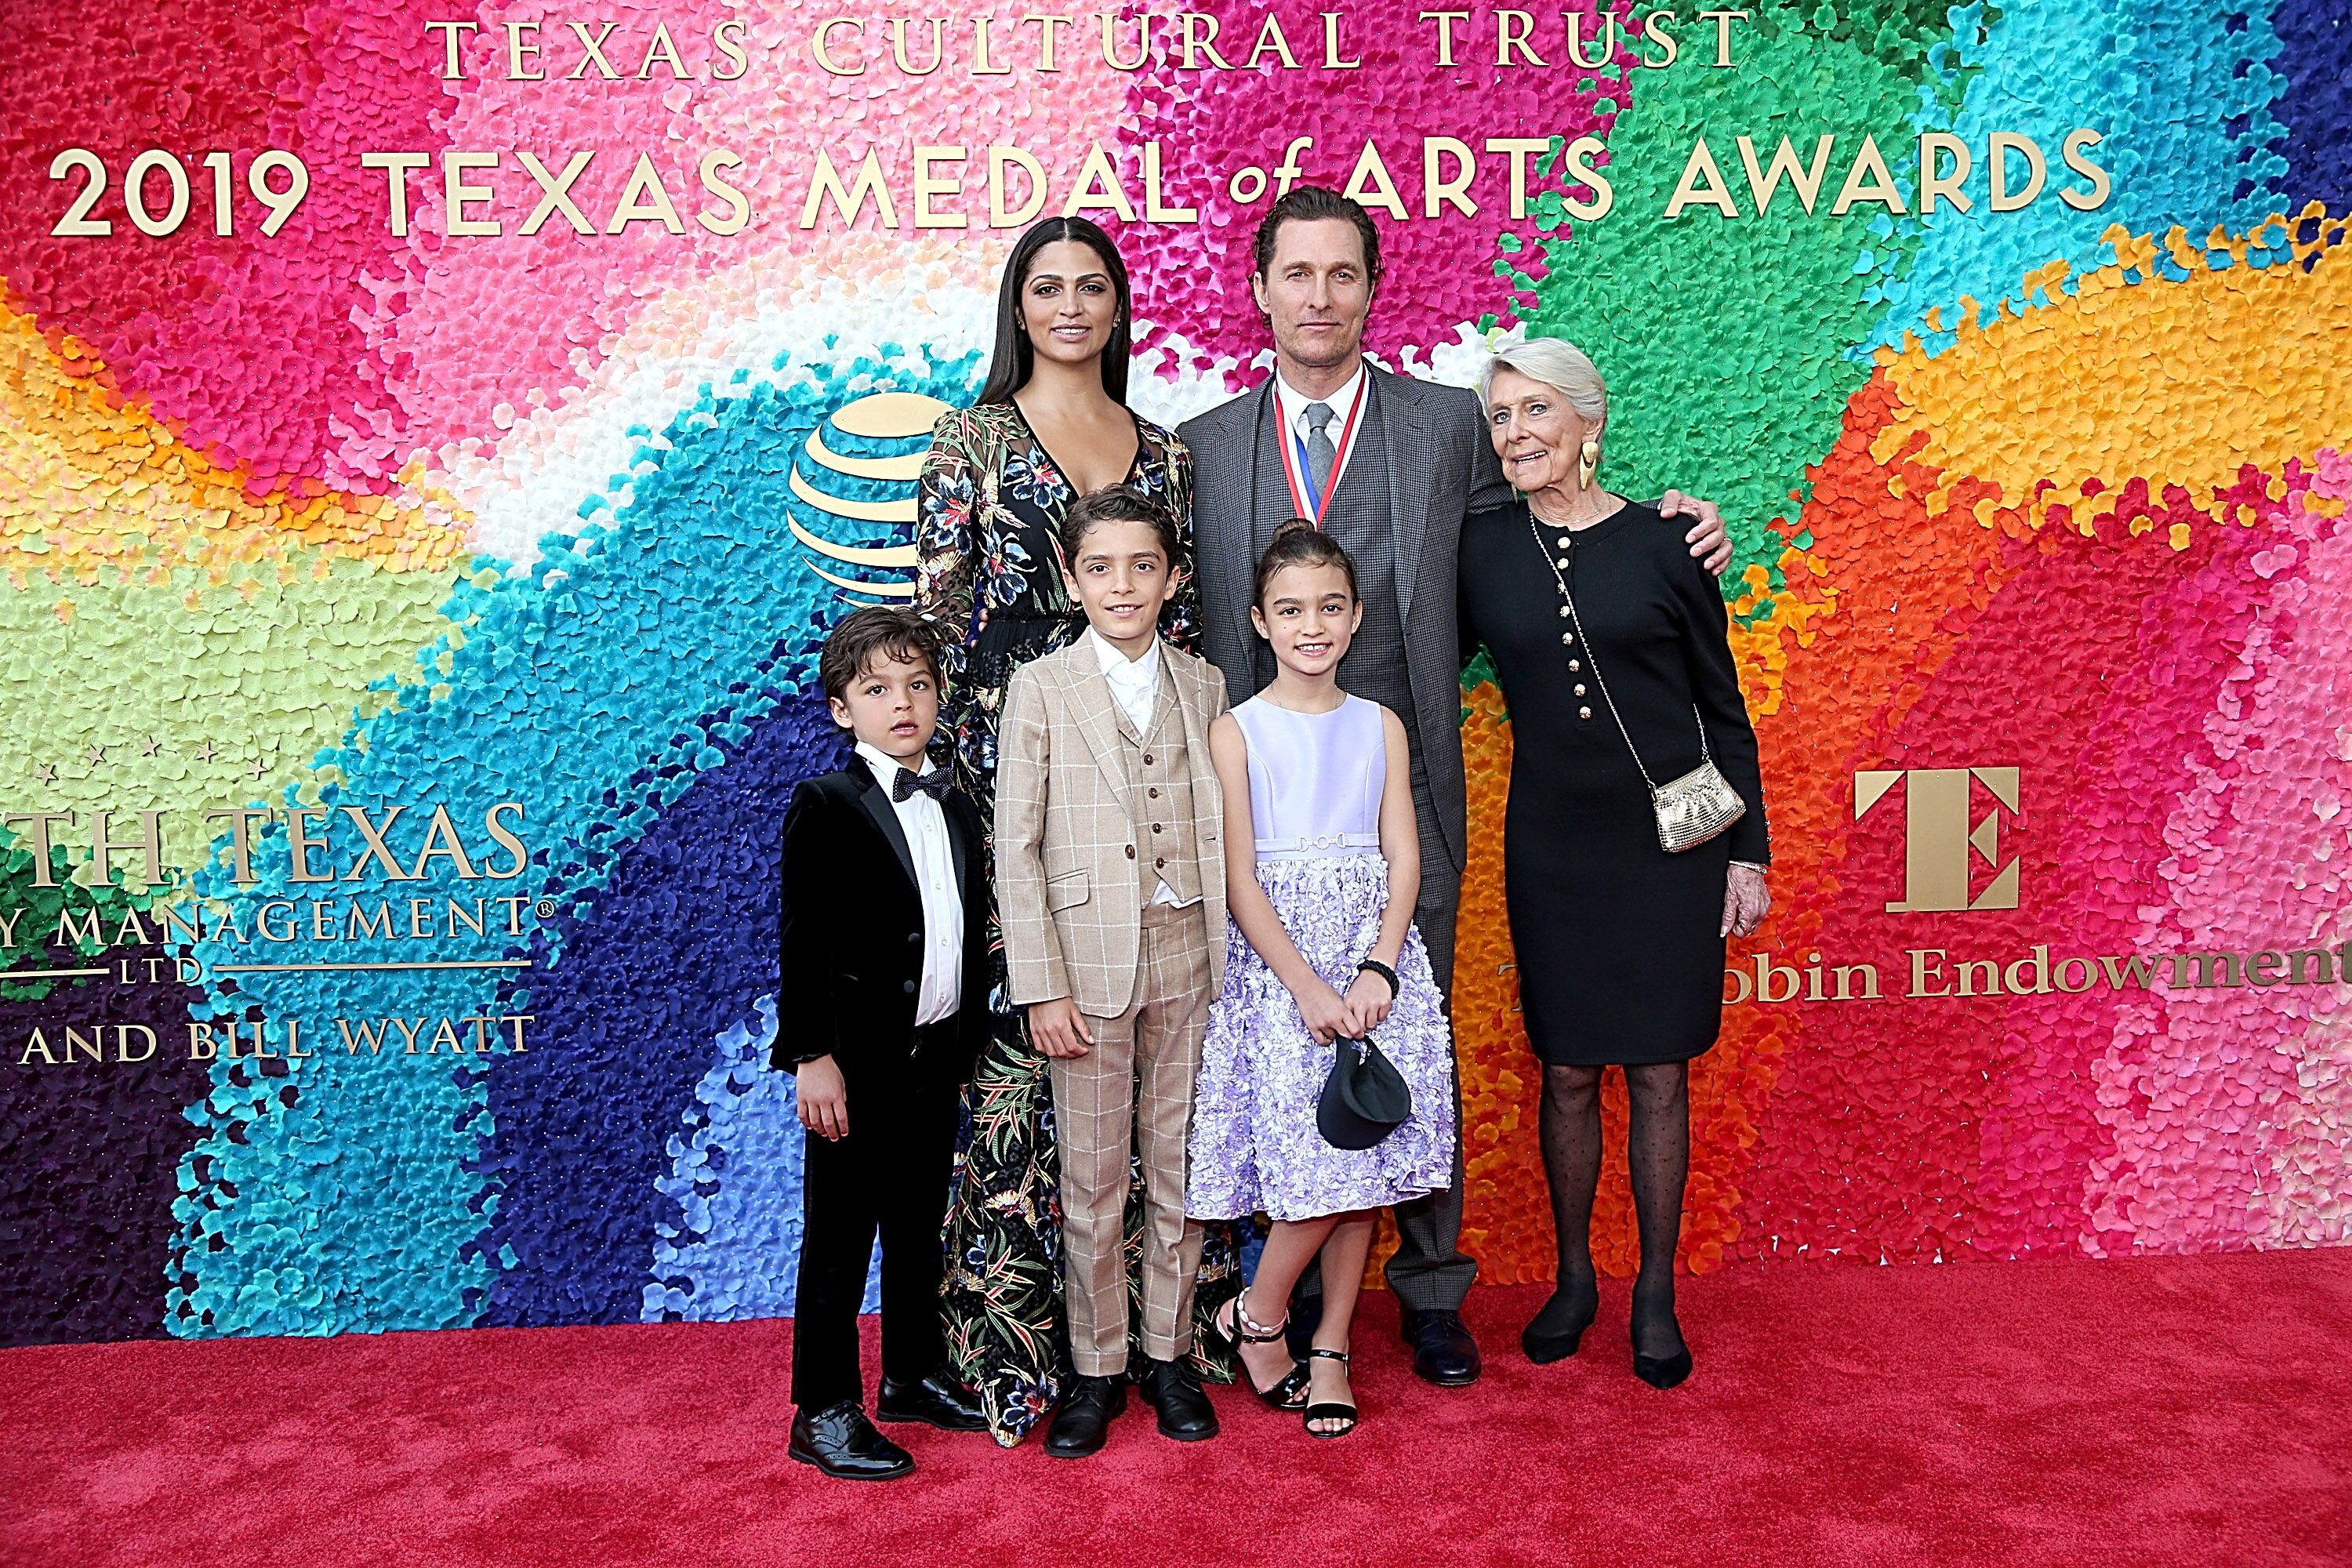 Matthew McConaughey, his wife Camila Alves, his mother Kay and his children at the Texas Medal Of Arts Awards in 2019. | Photo: Getty Images